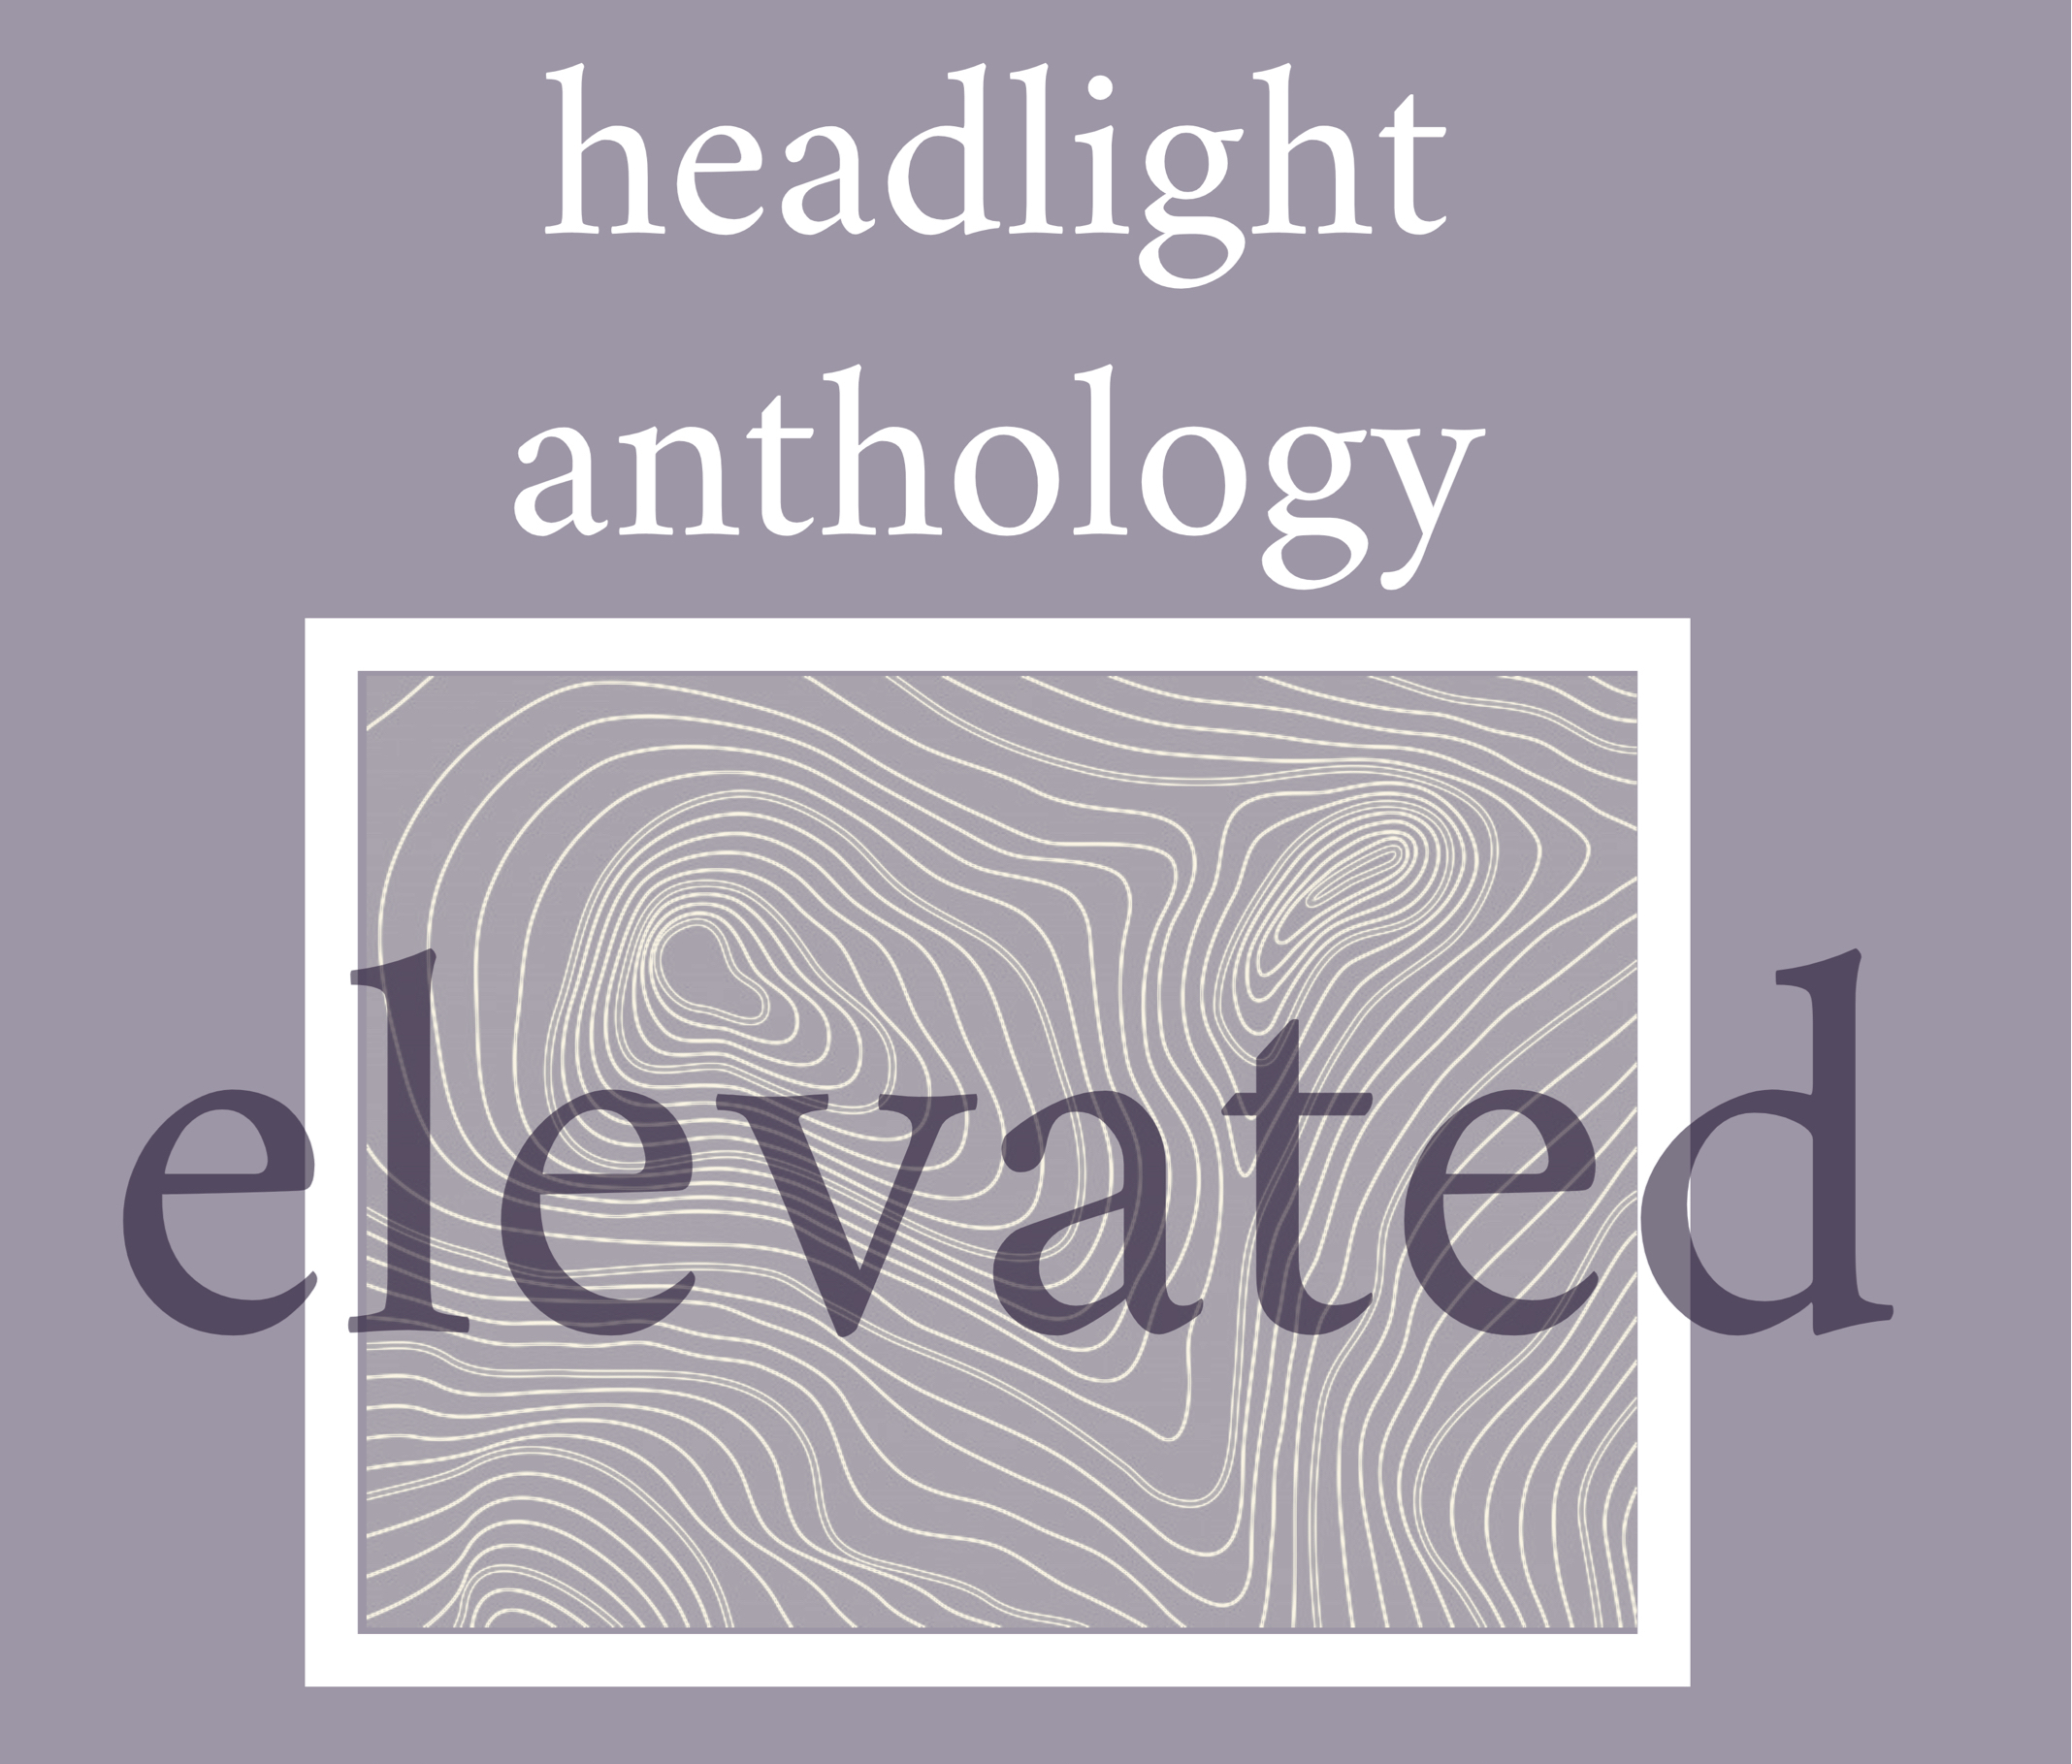 Cover of Headlight issue 23, featuring the title "elevated" over a rectangle with a topographical diagram.